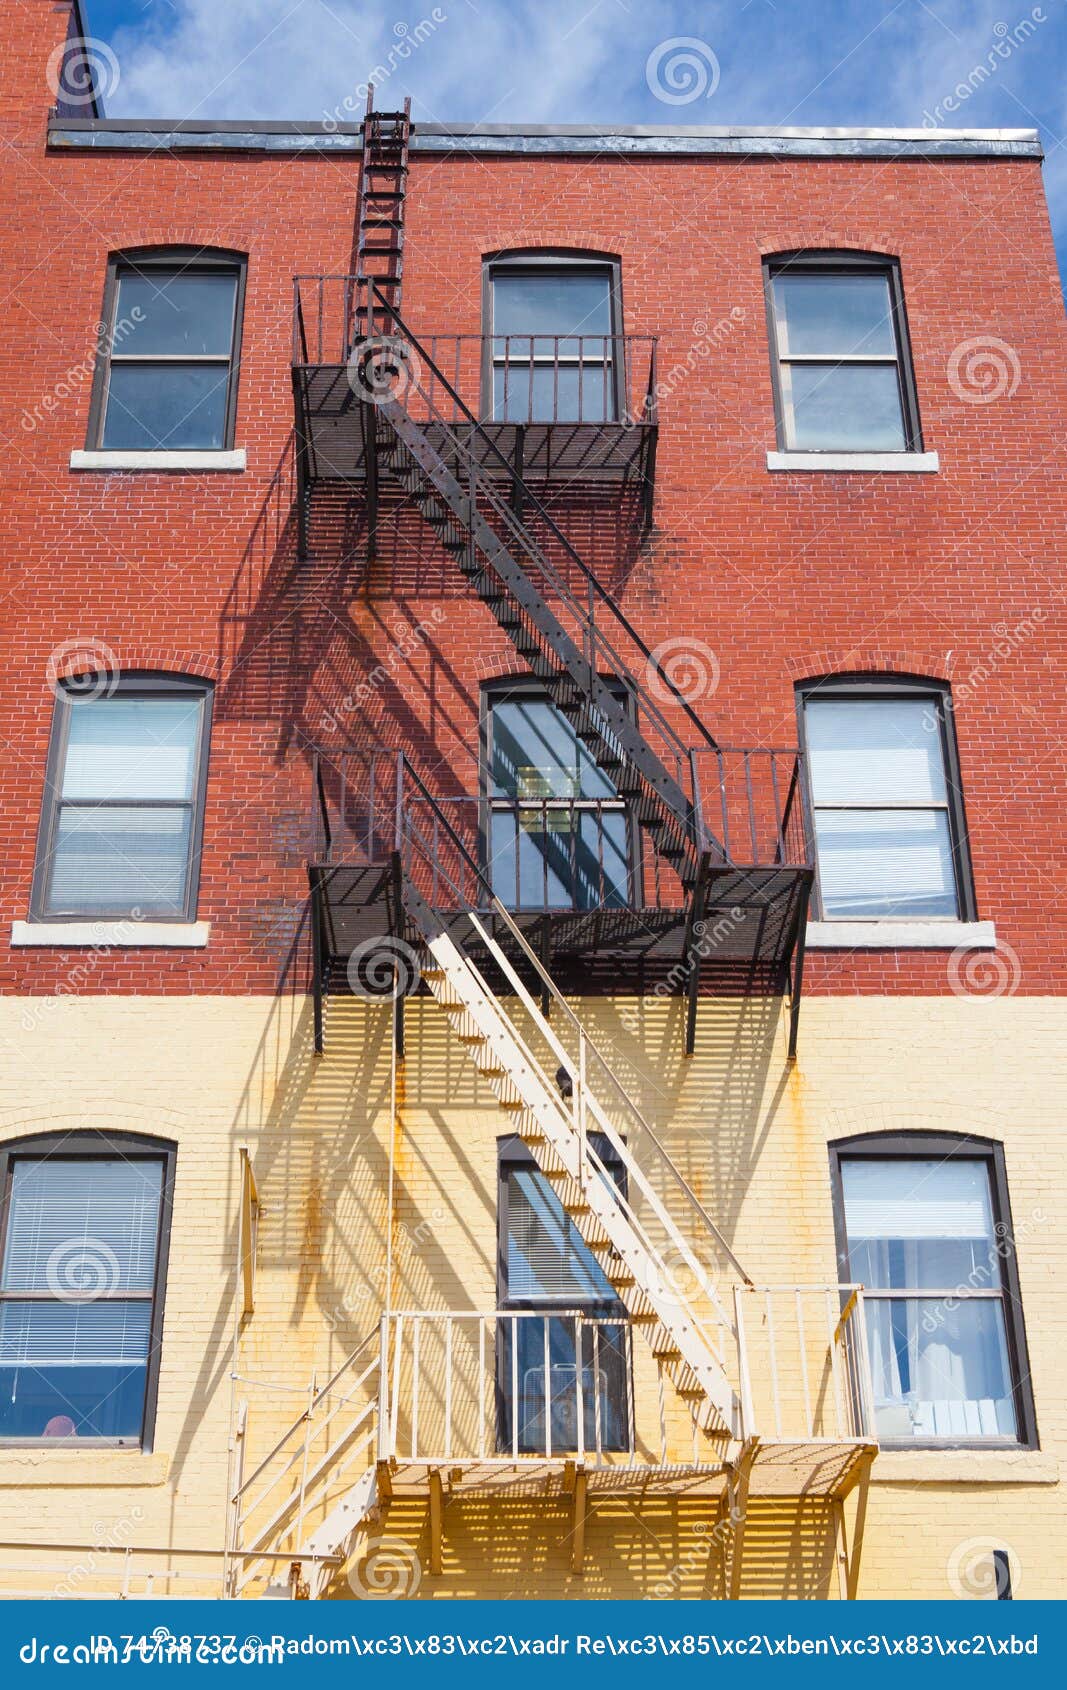 The Typical American Fire Escape Ladder Stock Image - Image of